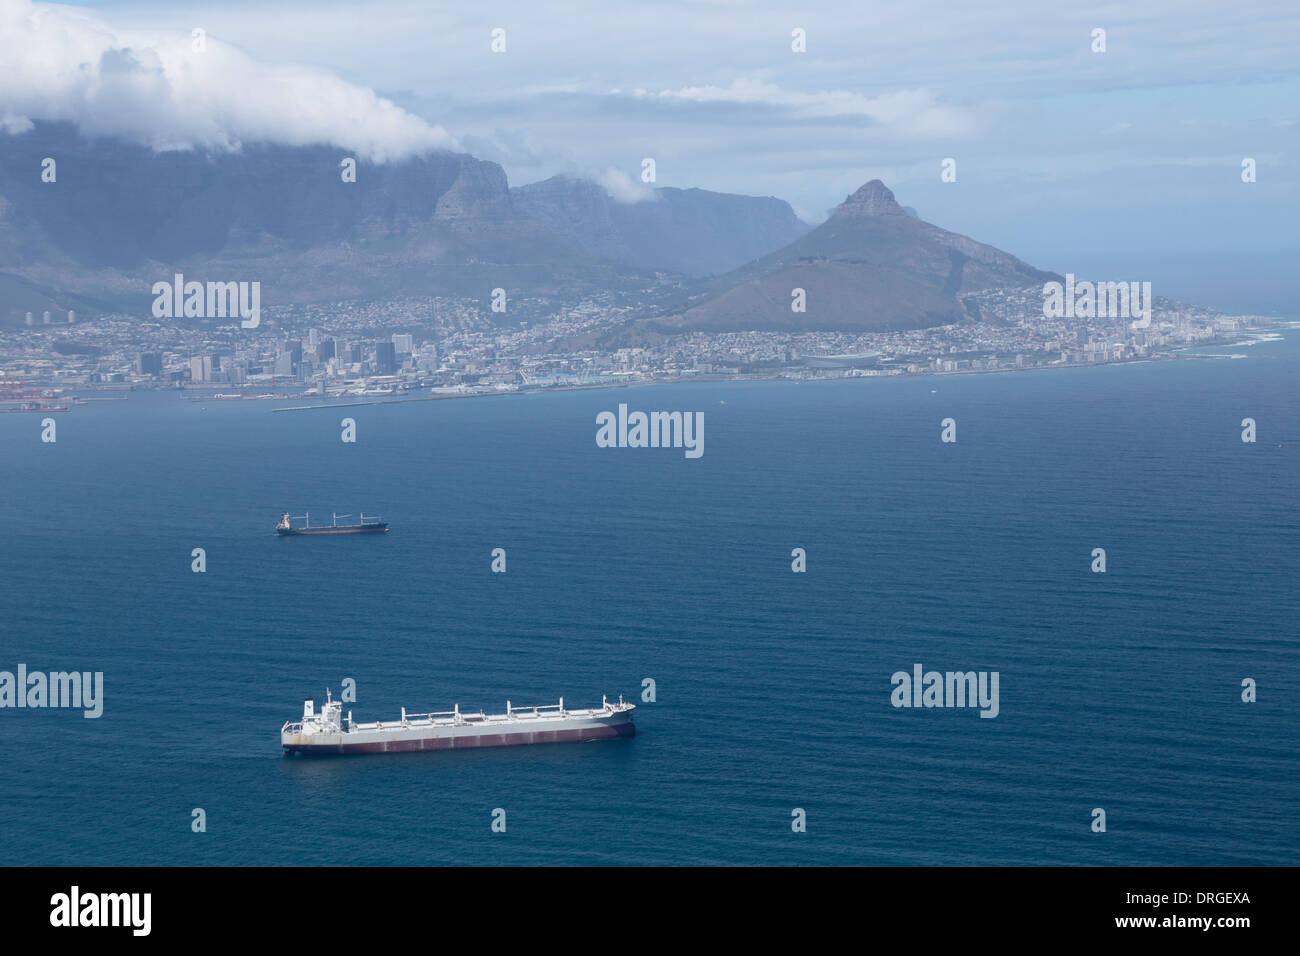 Aerial view of ships in Table Bay, with Cape Town, Table Mountain and Lion's Head in the background Stock Photo